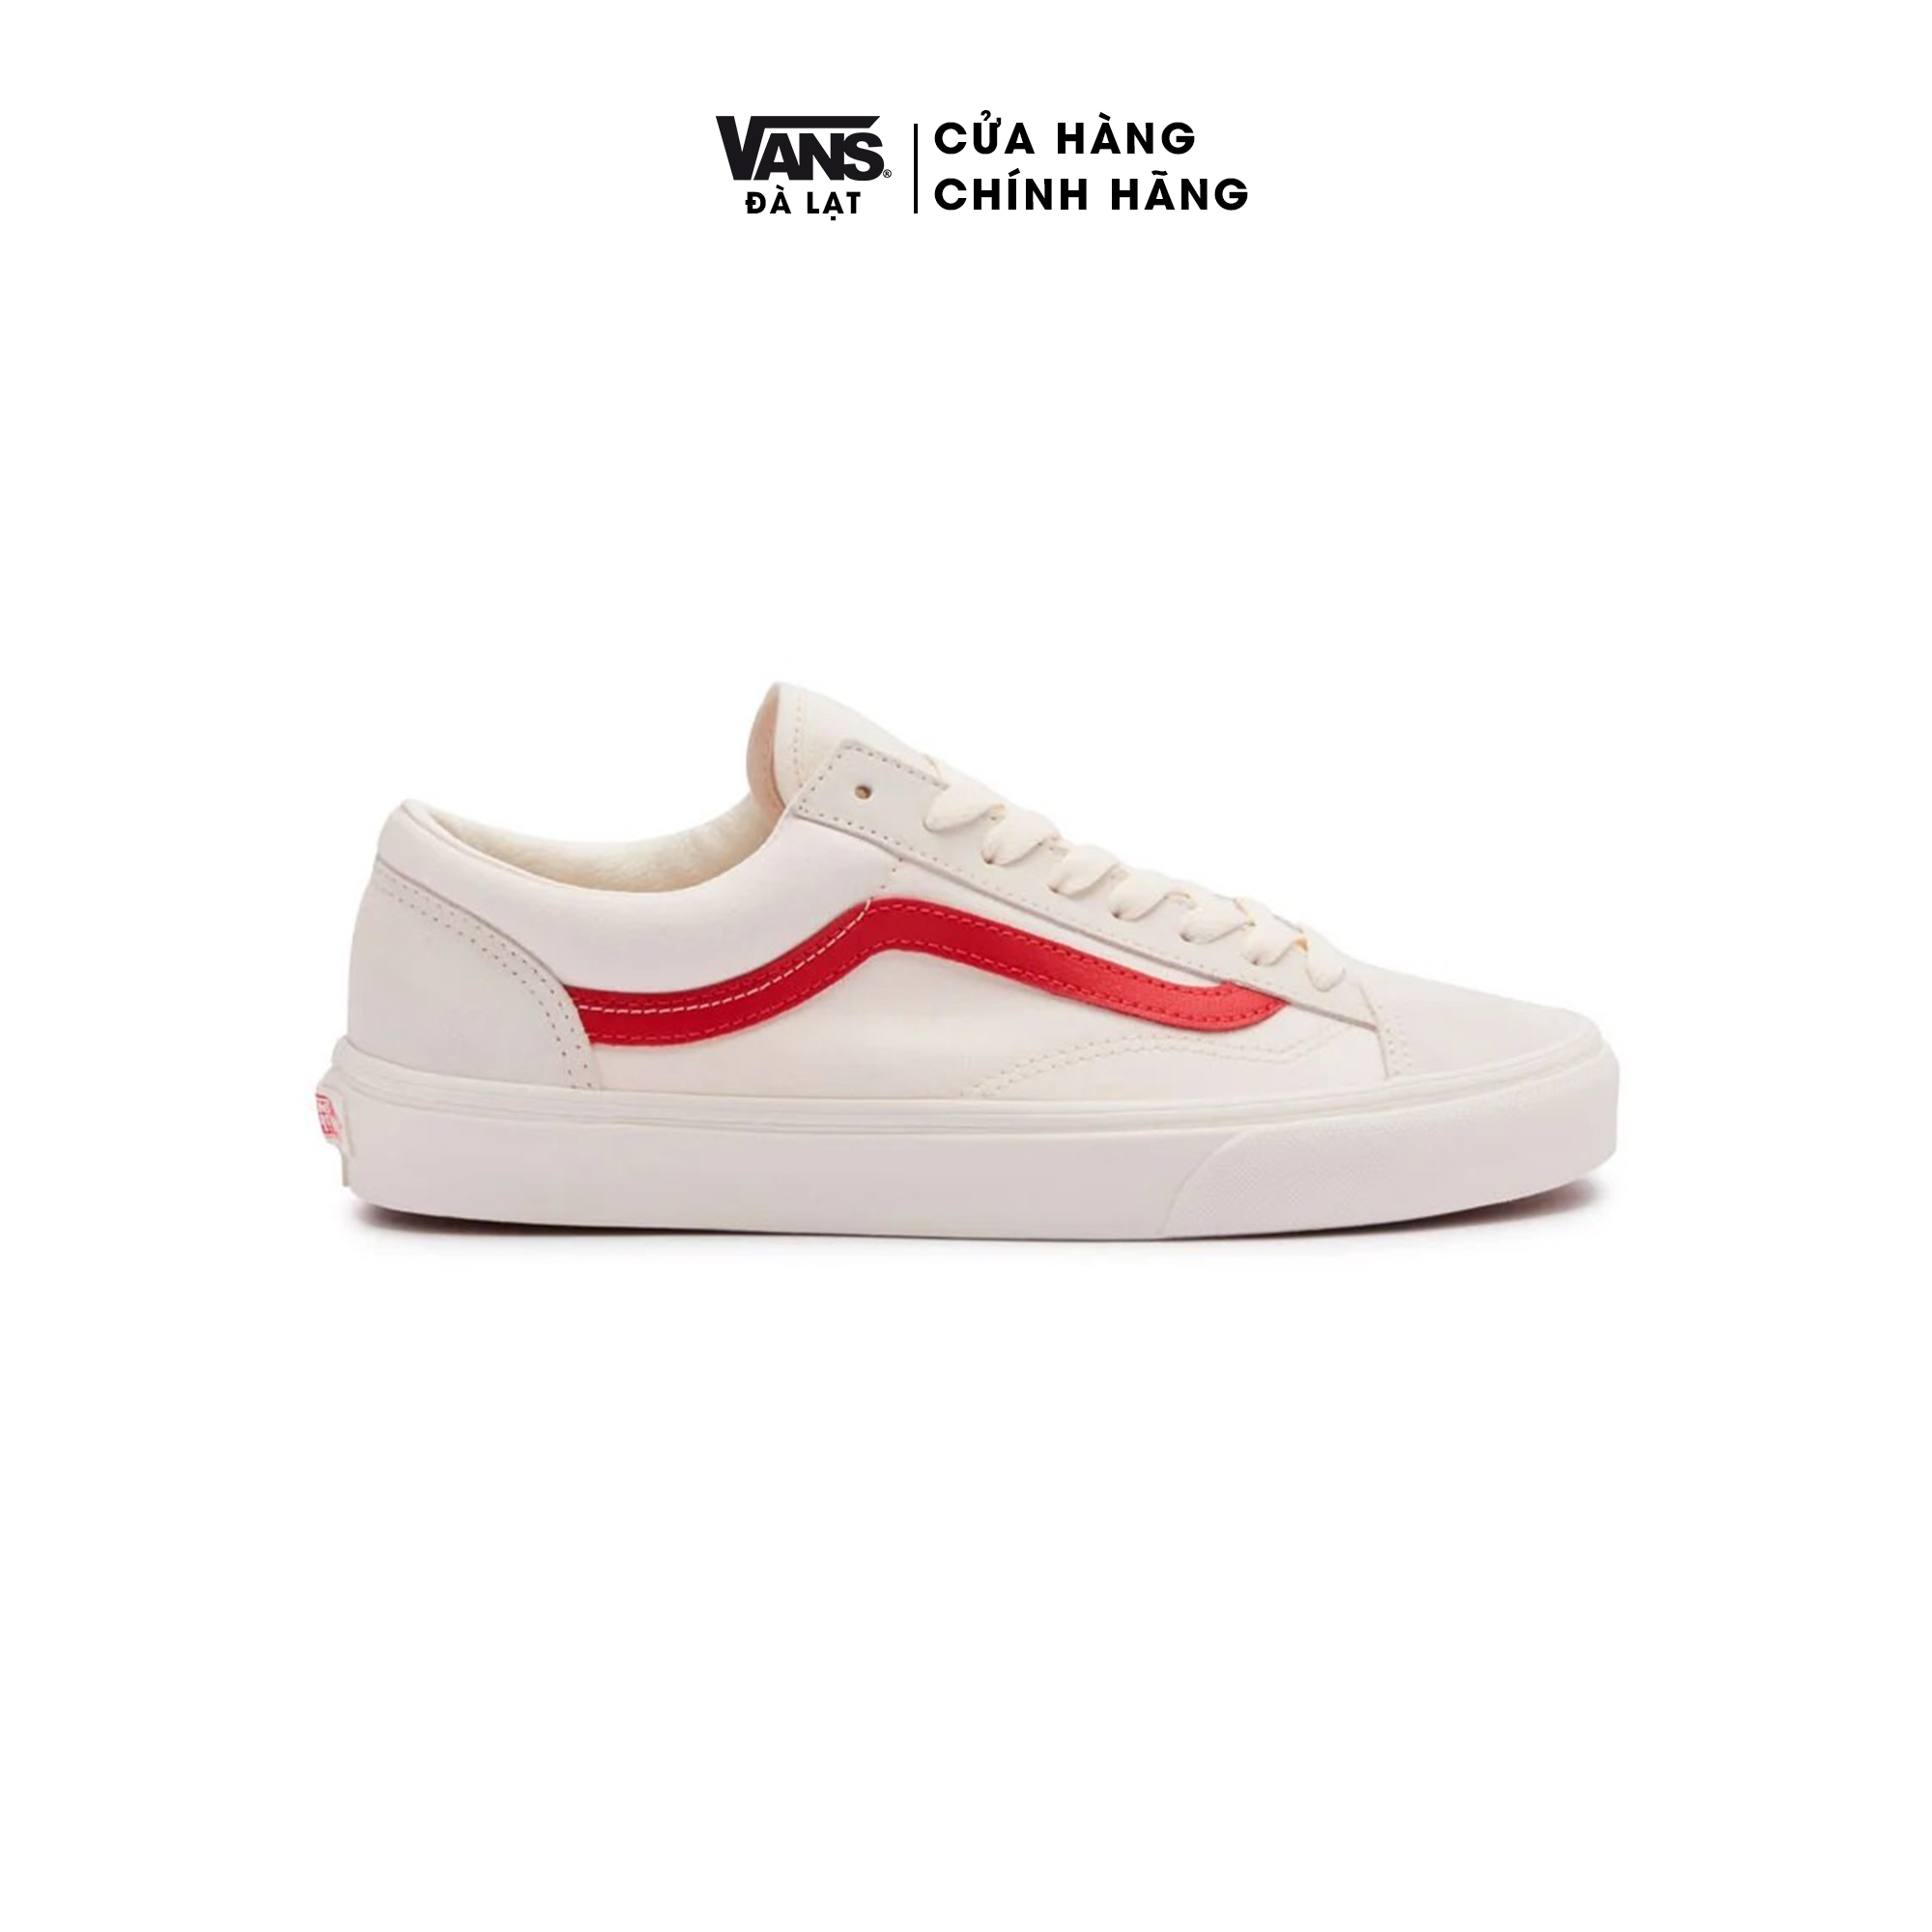 Giày Vans Old Skool Style 36 Marshmallow Racing Red VN0A3DZ3OXS